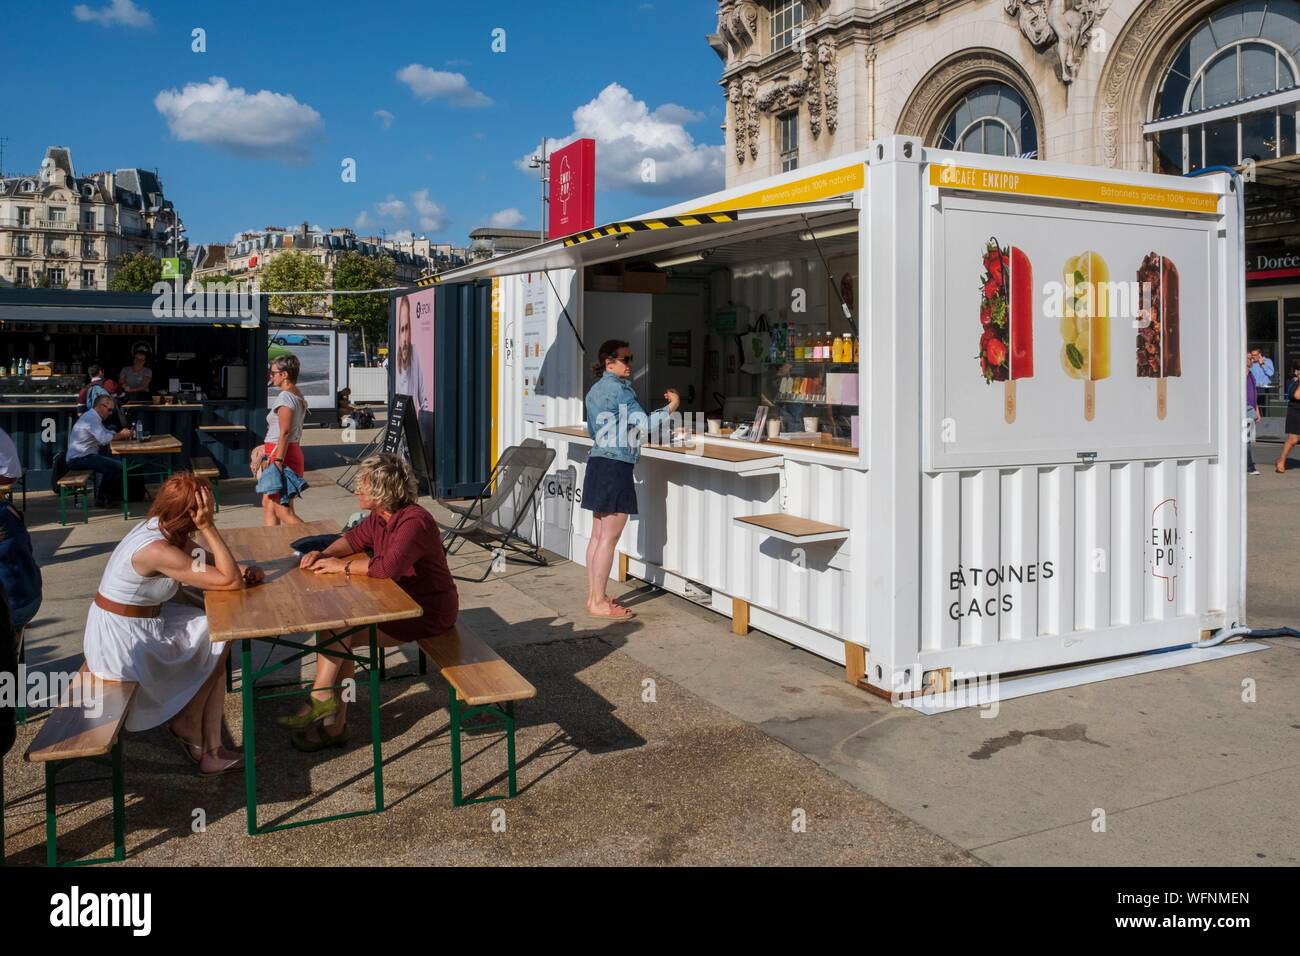 France, Paris, Gare de Lyon railway station, the square, container snacking Stock Photo